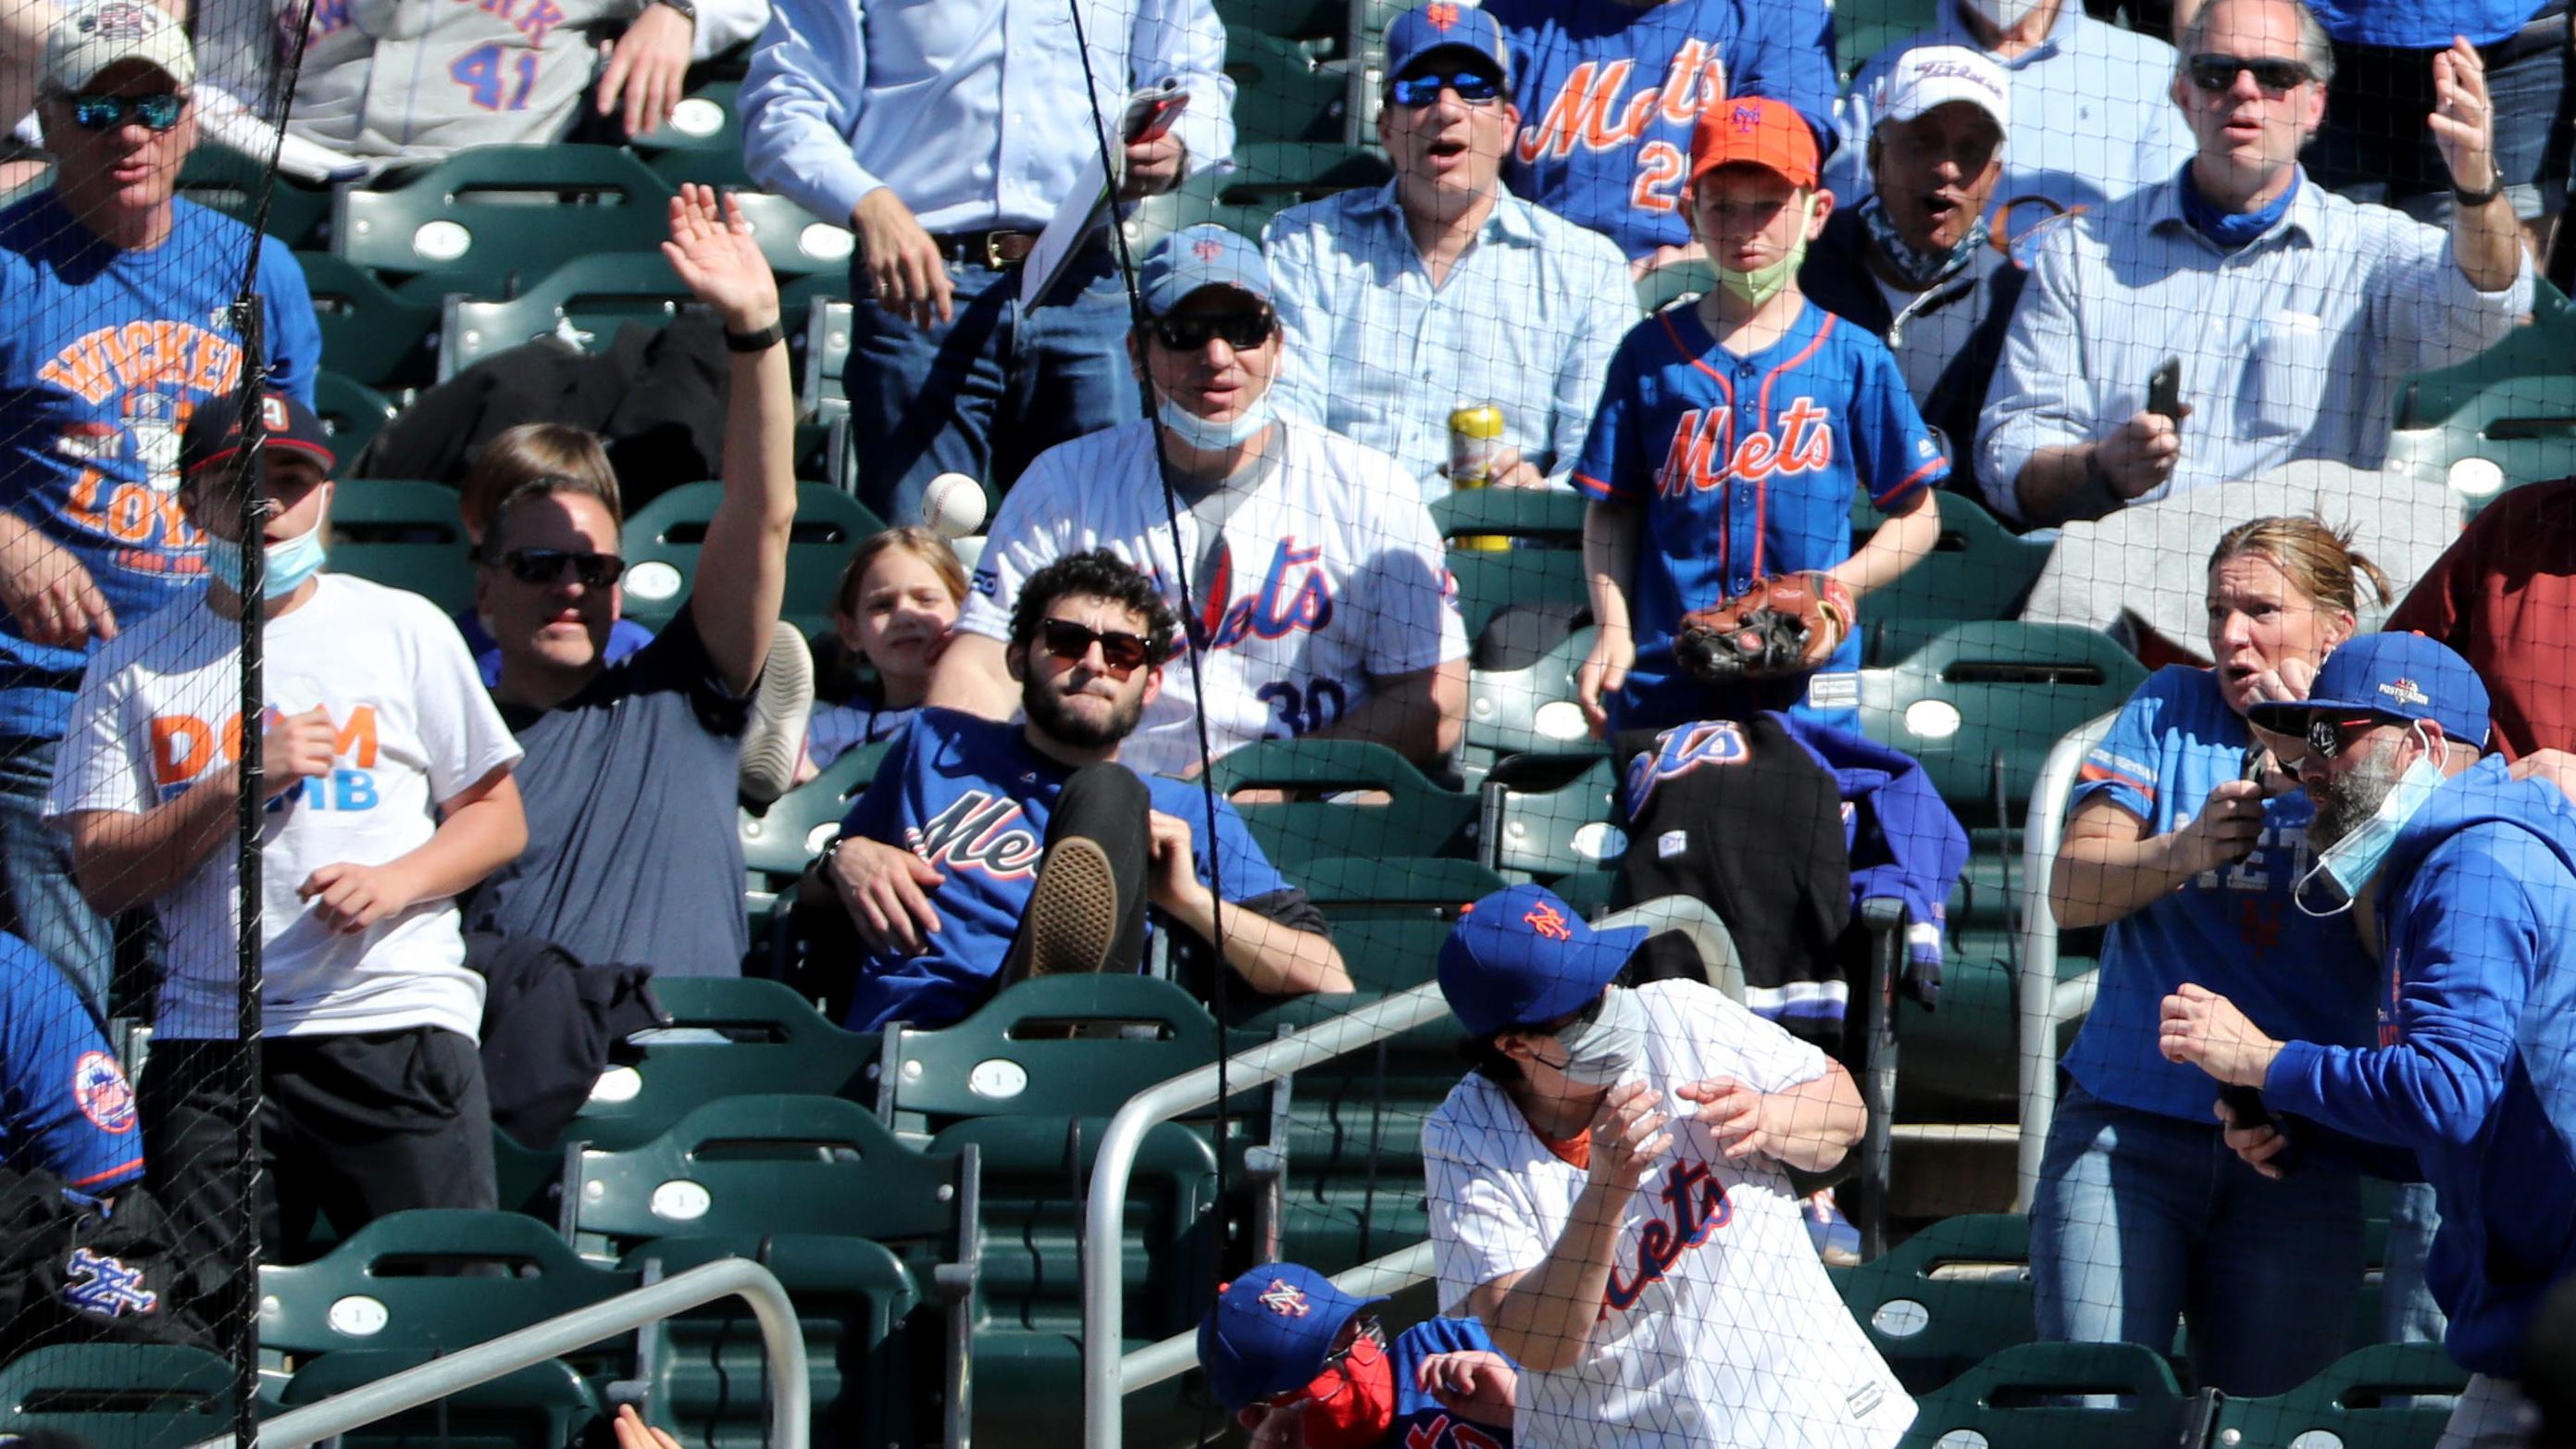 Some Mets fans try to reach a foul ball while others duck for cover. Thursday, April 8, 2021 Opening Day At Citi Field / Kevin R. Wexler-NorthJersey.com via Imagn Content Services, LLC